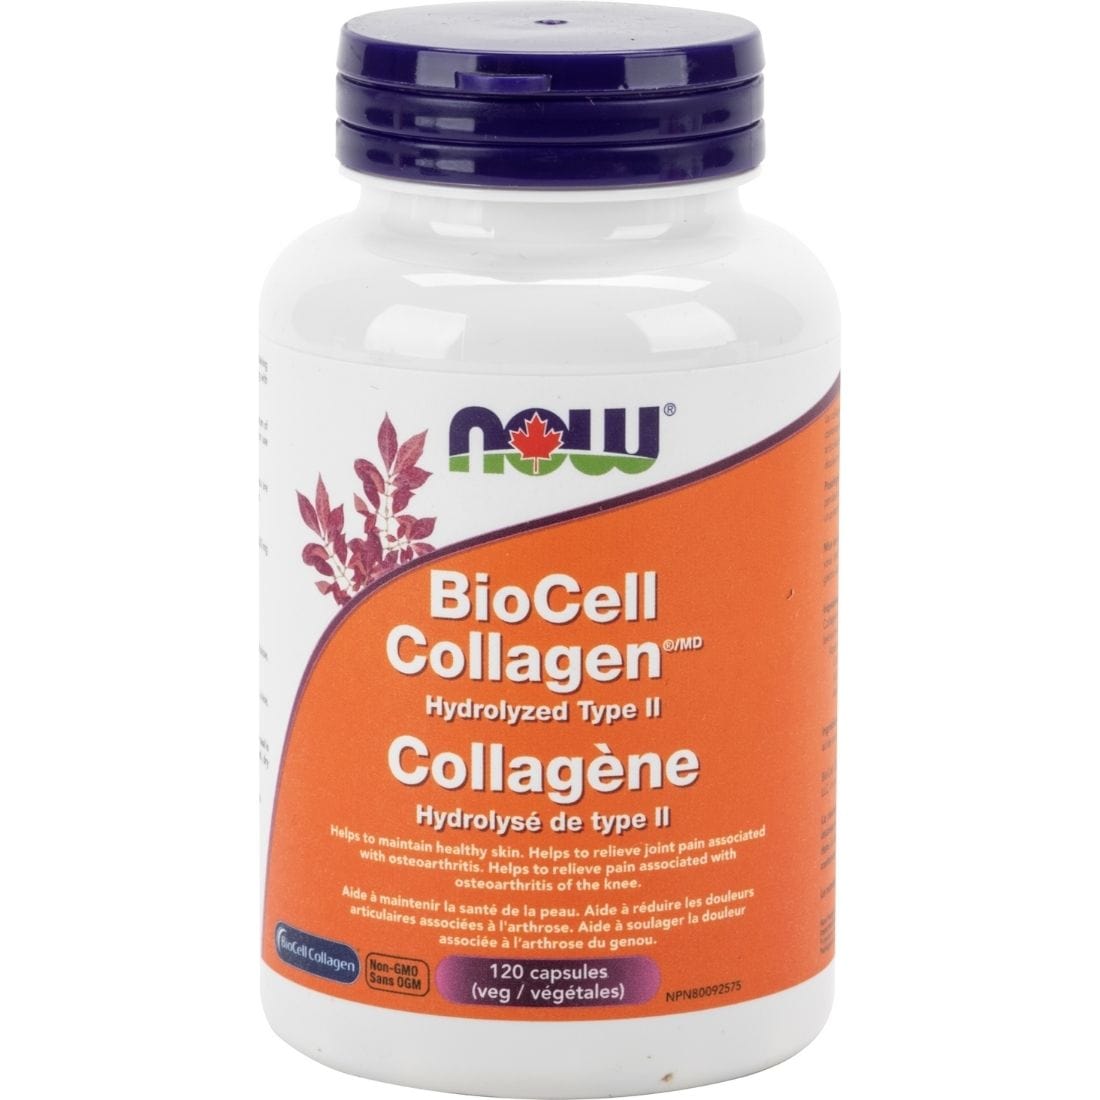 Now BioCell Type II Collagen 500mg, 120 Vegetable Capsules